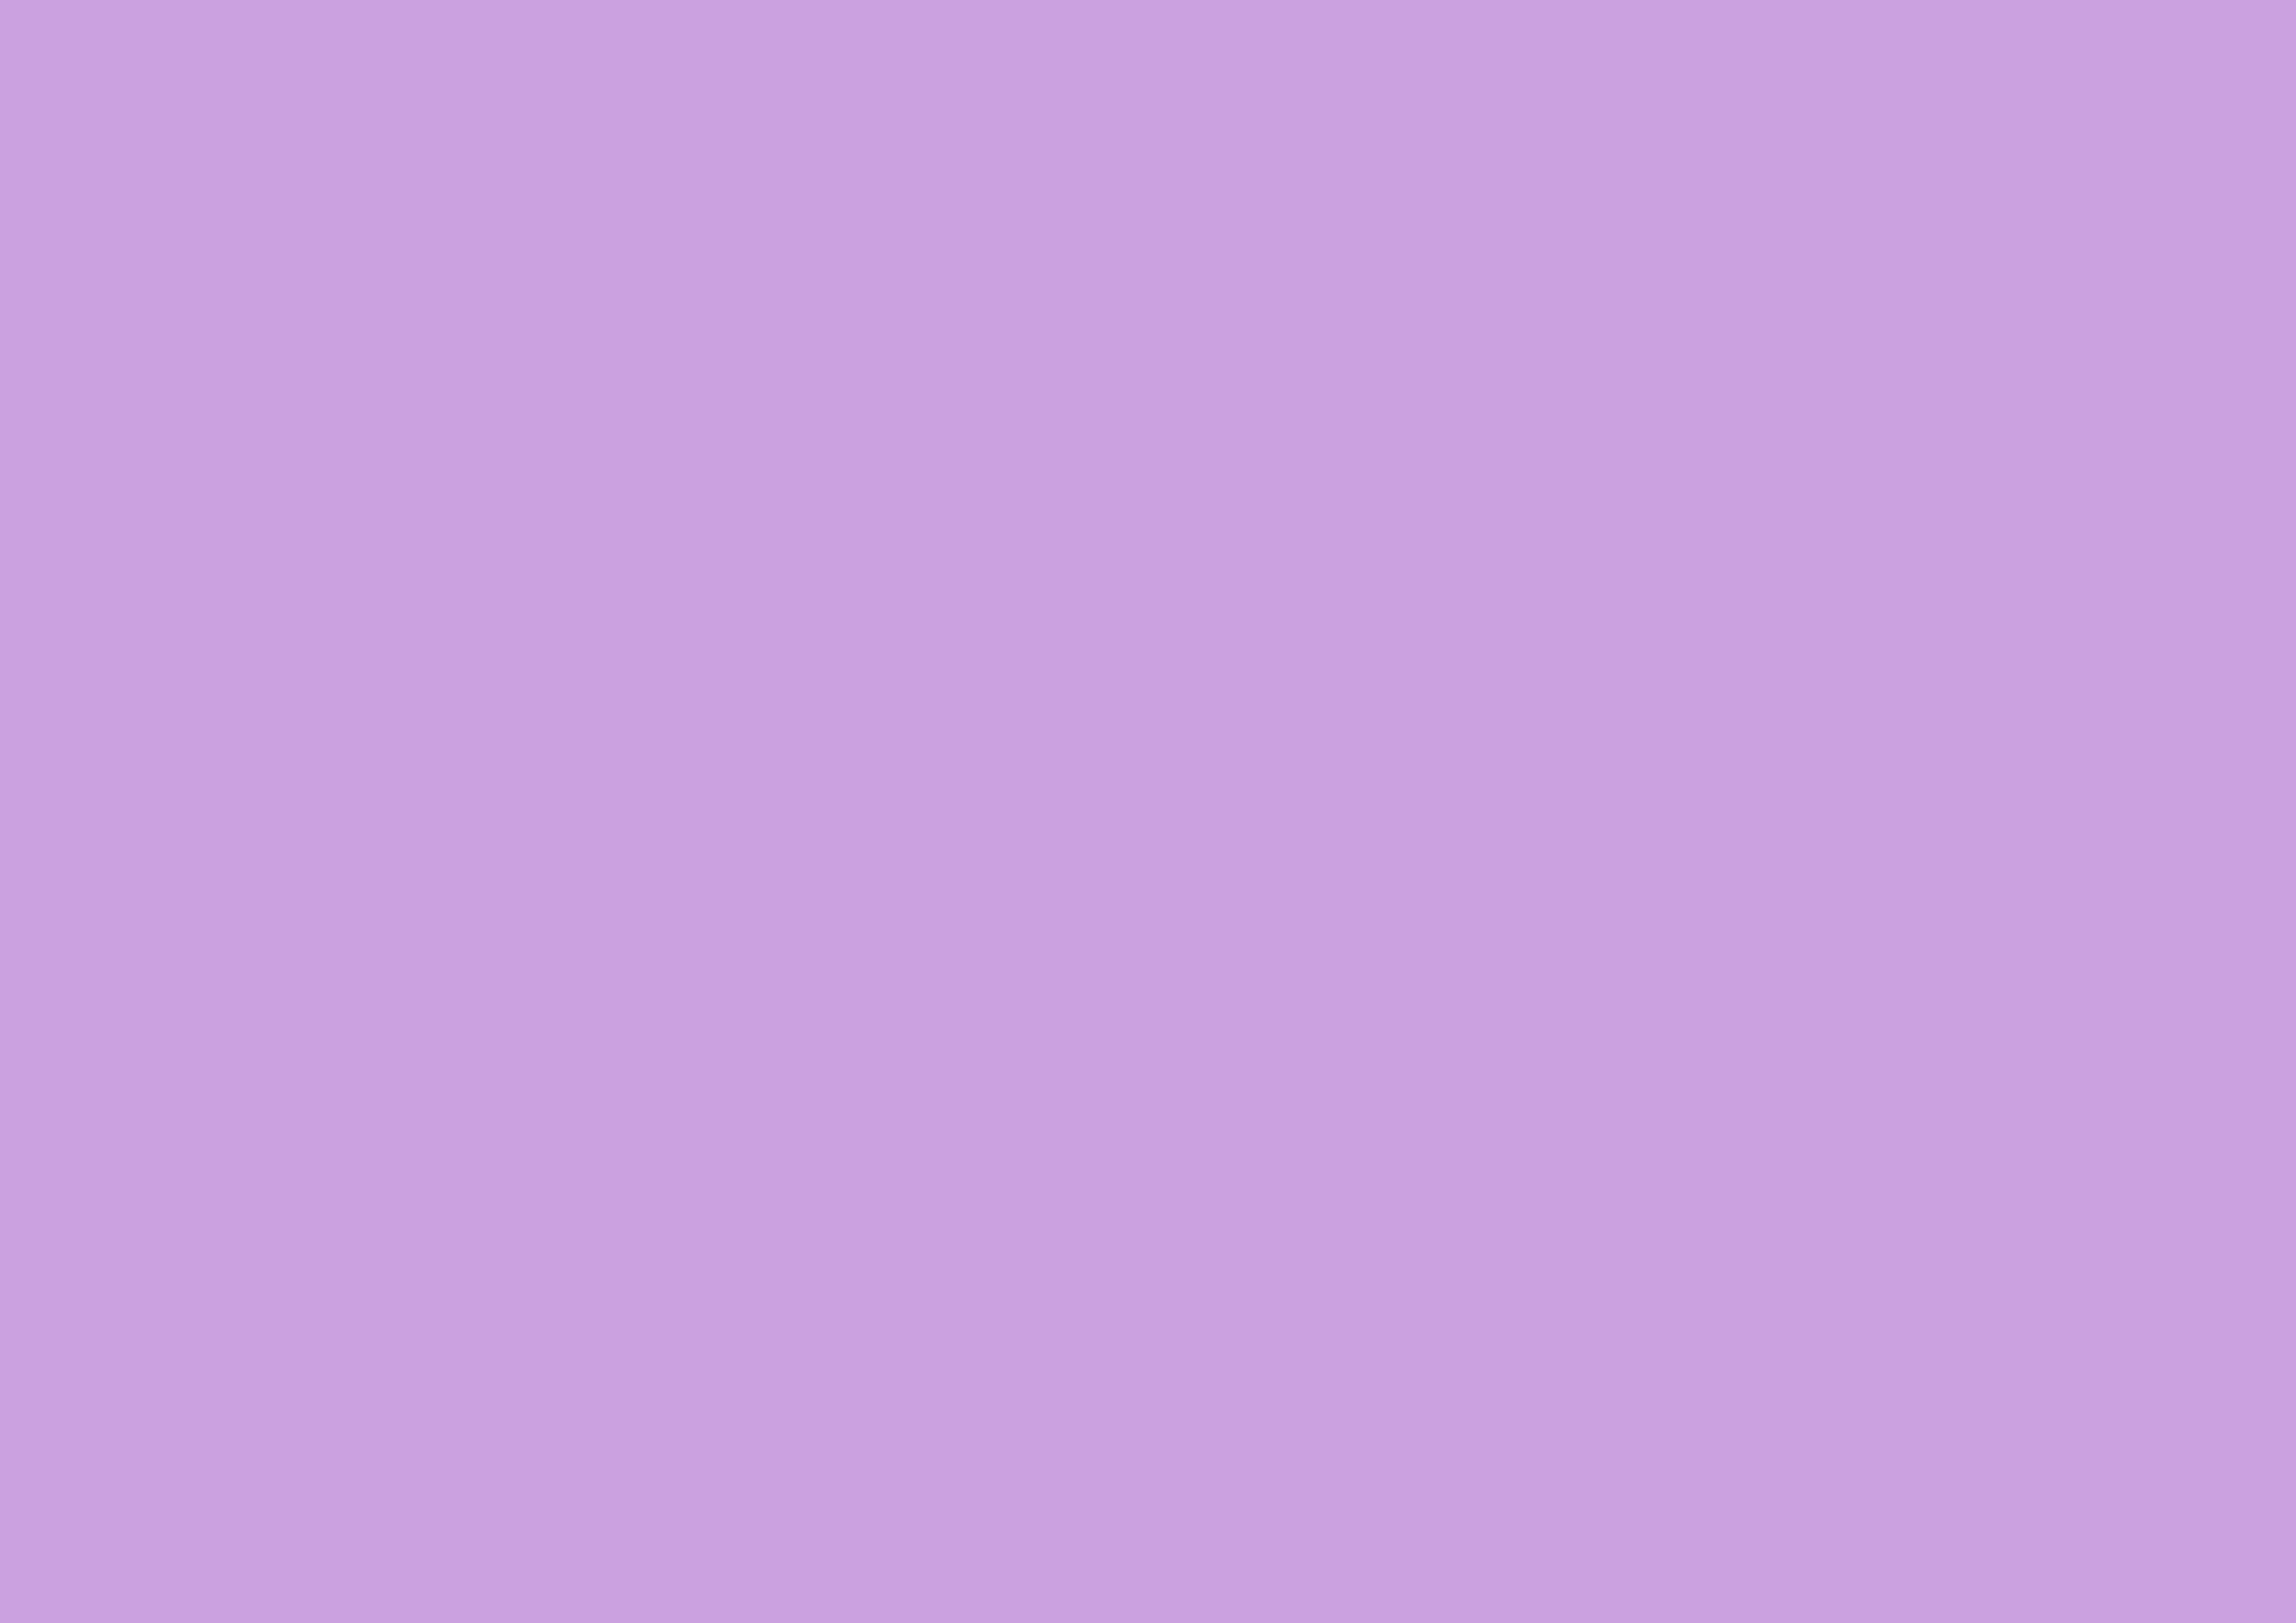 3508x2480 Wisteria Solid Color Background